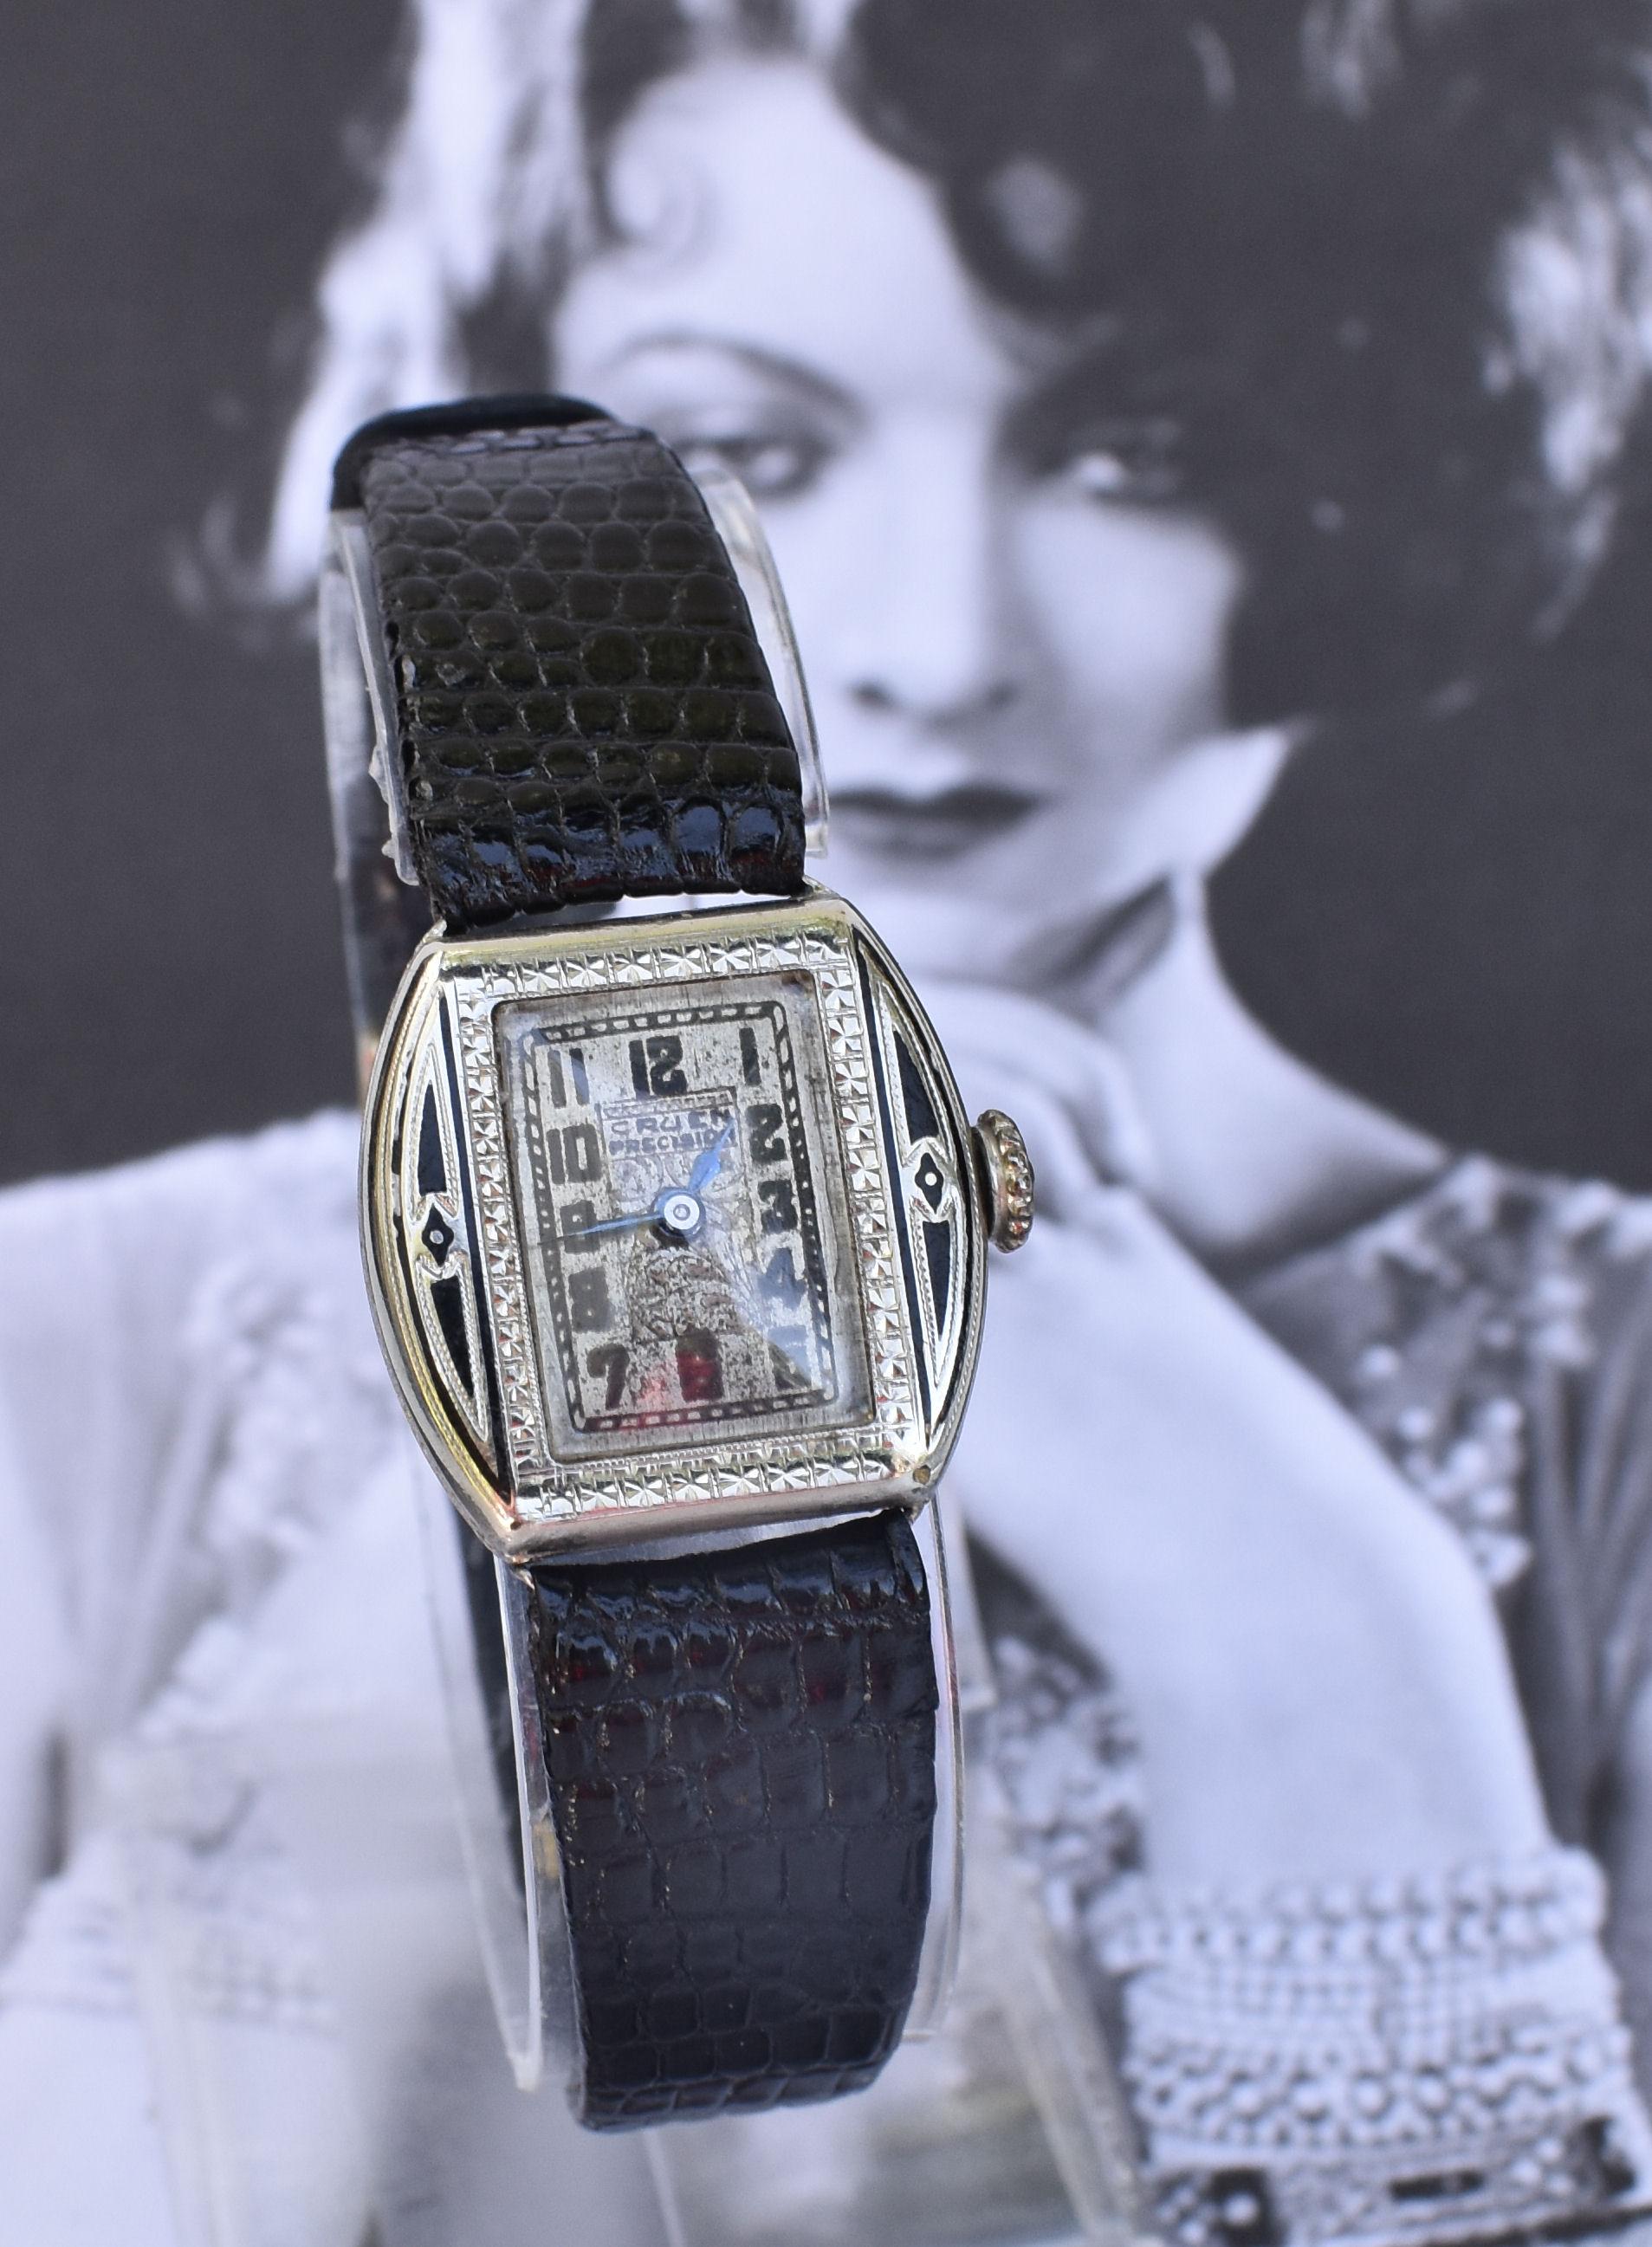 For your consideration is this truly beautiful ladies original Art Deco manual wrist watch with original strap. The main case is engine turned 14k white gold filled with enamel as accents. Heavy art deco decorative engraving to the case and superb